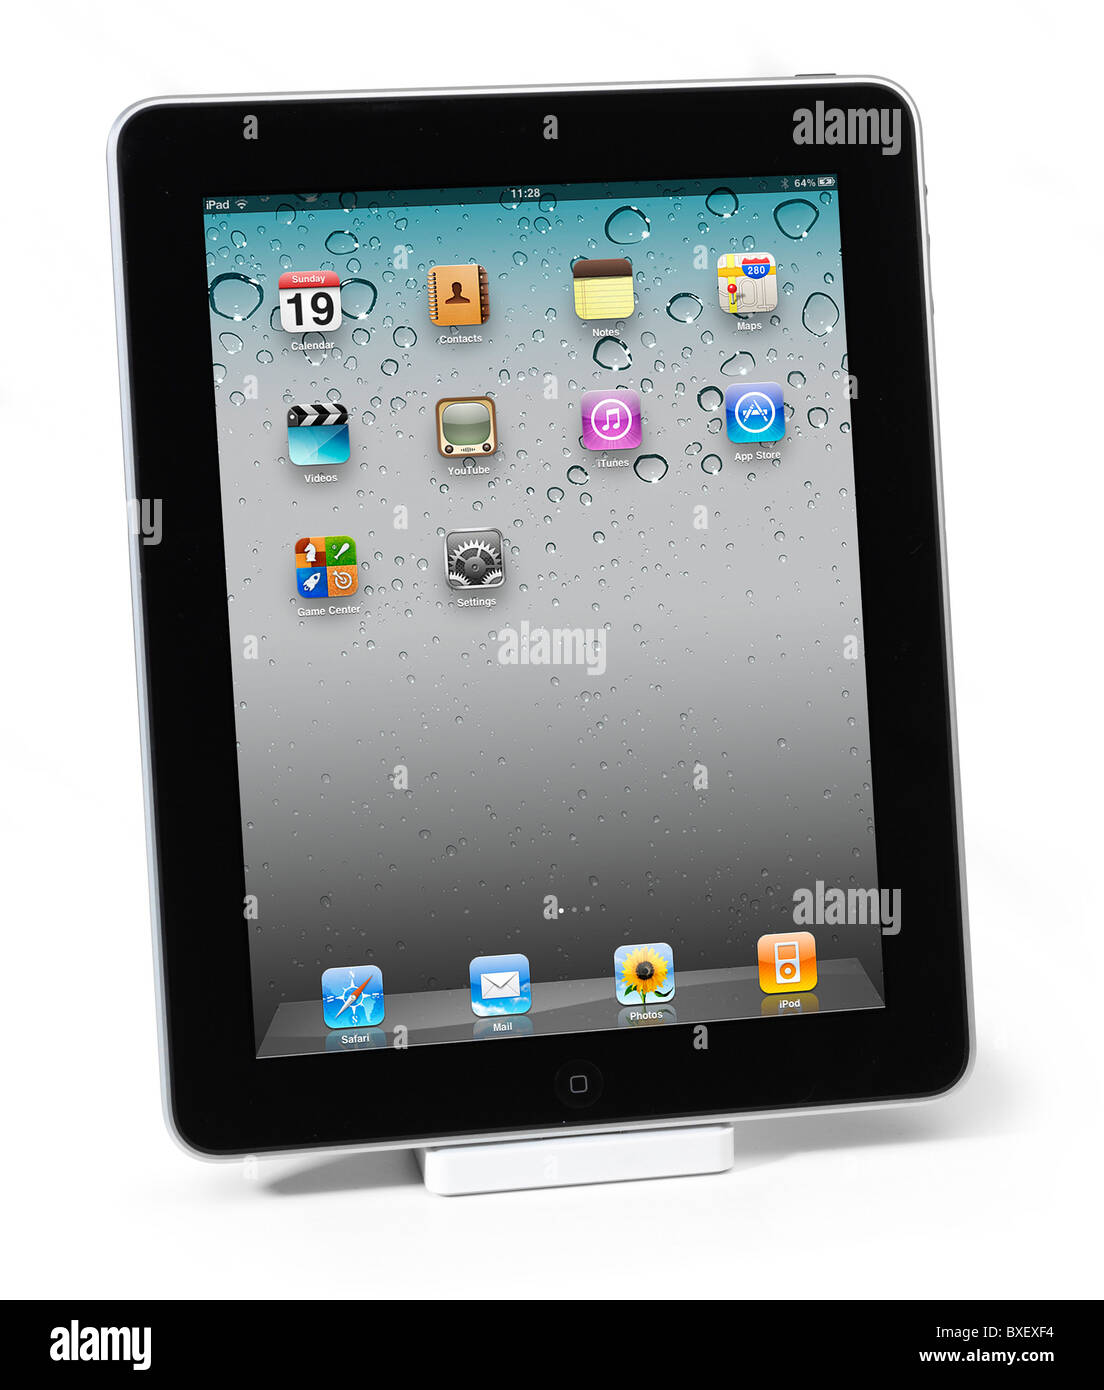 First Apple iPad with 4.2 screen shown in iPad dock on white background Stock Photo